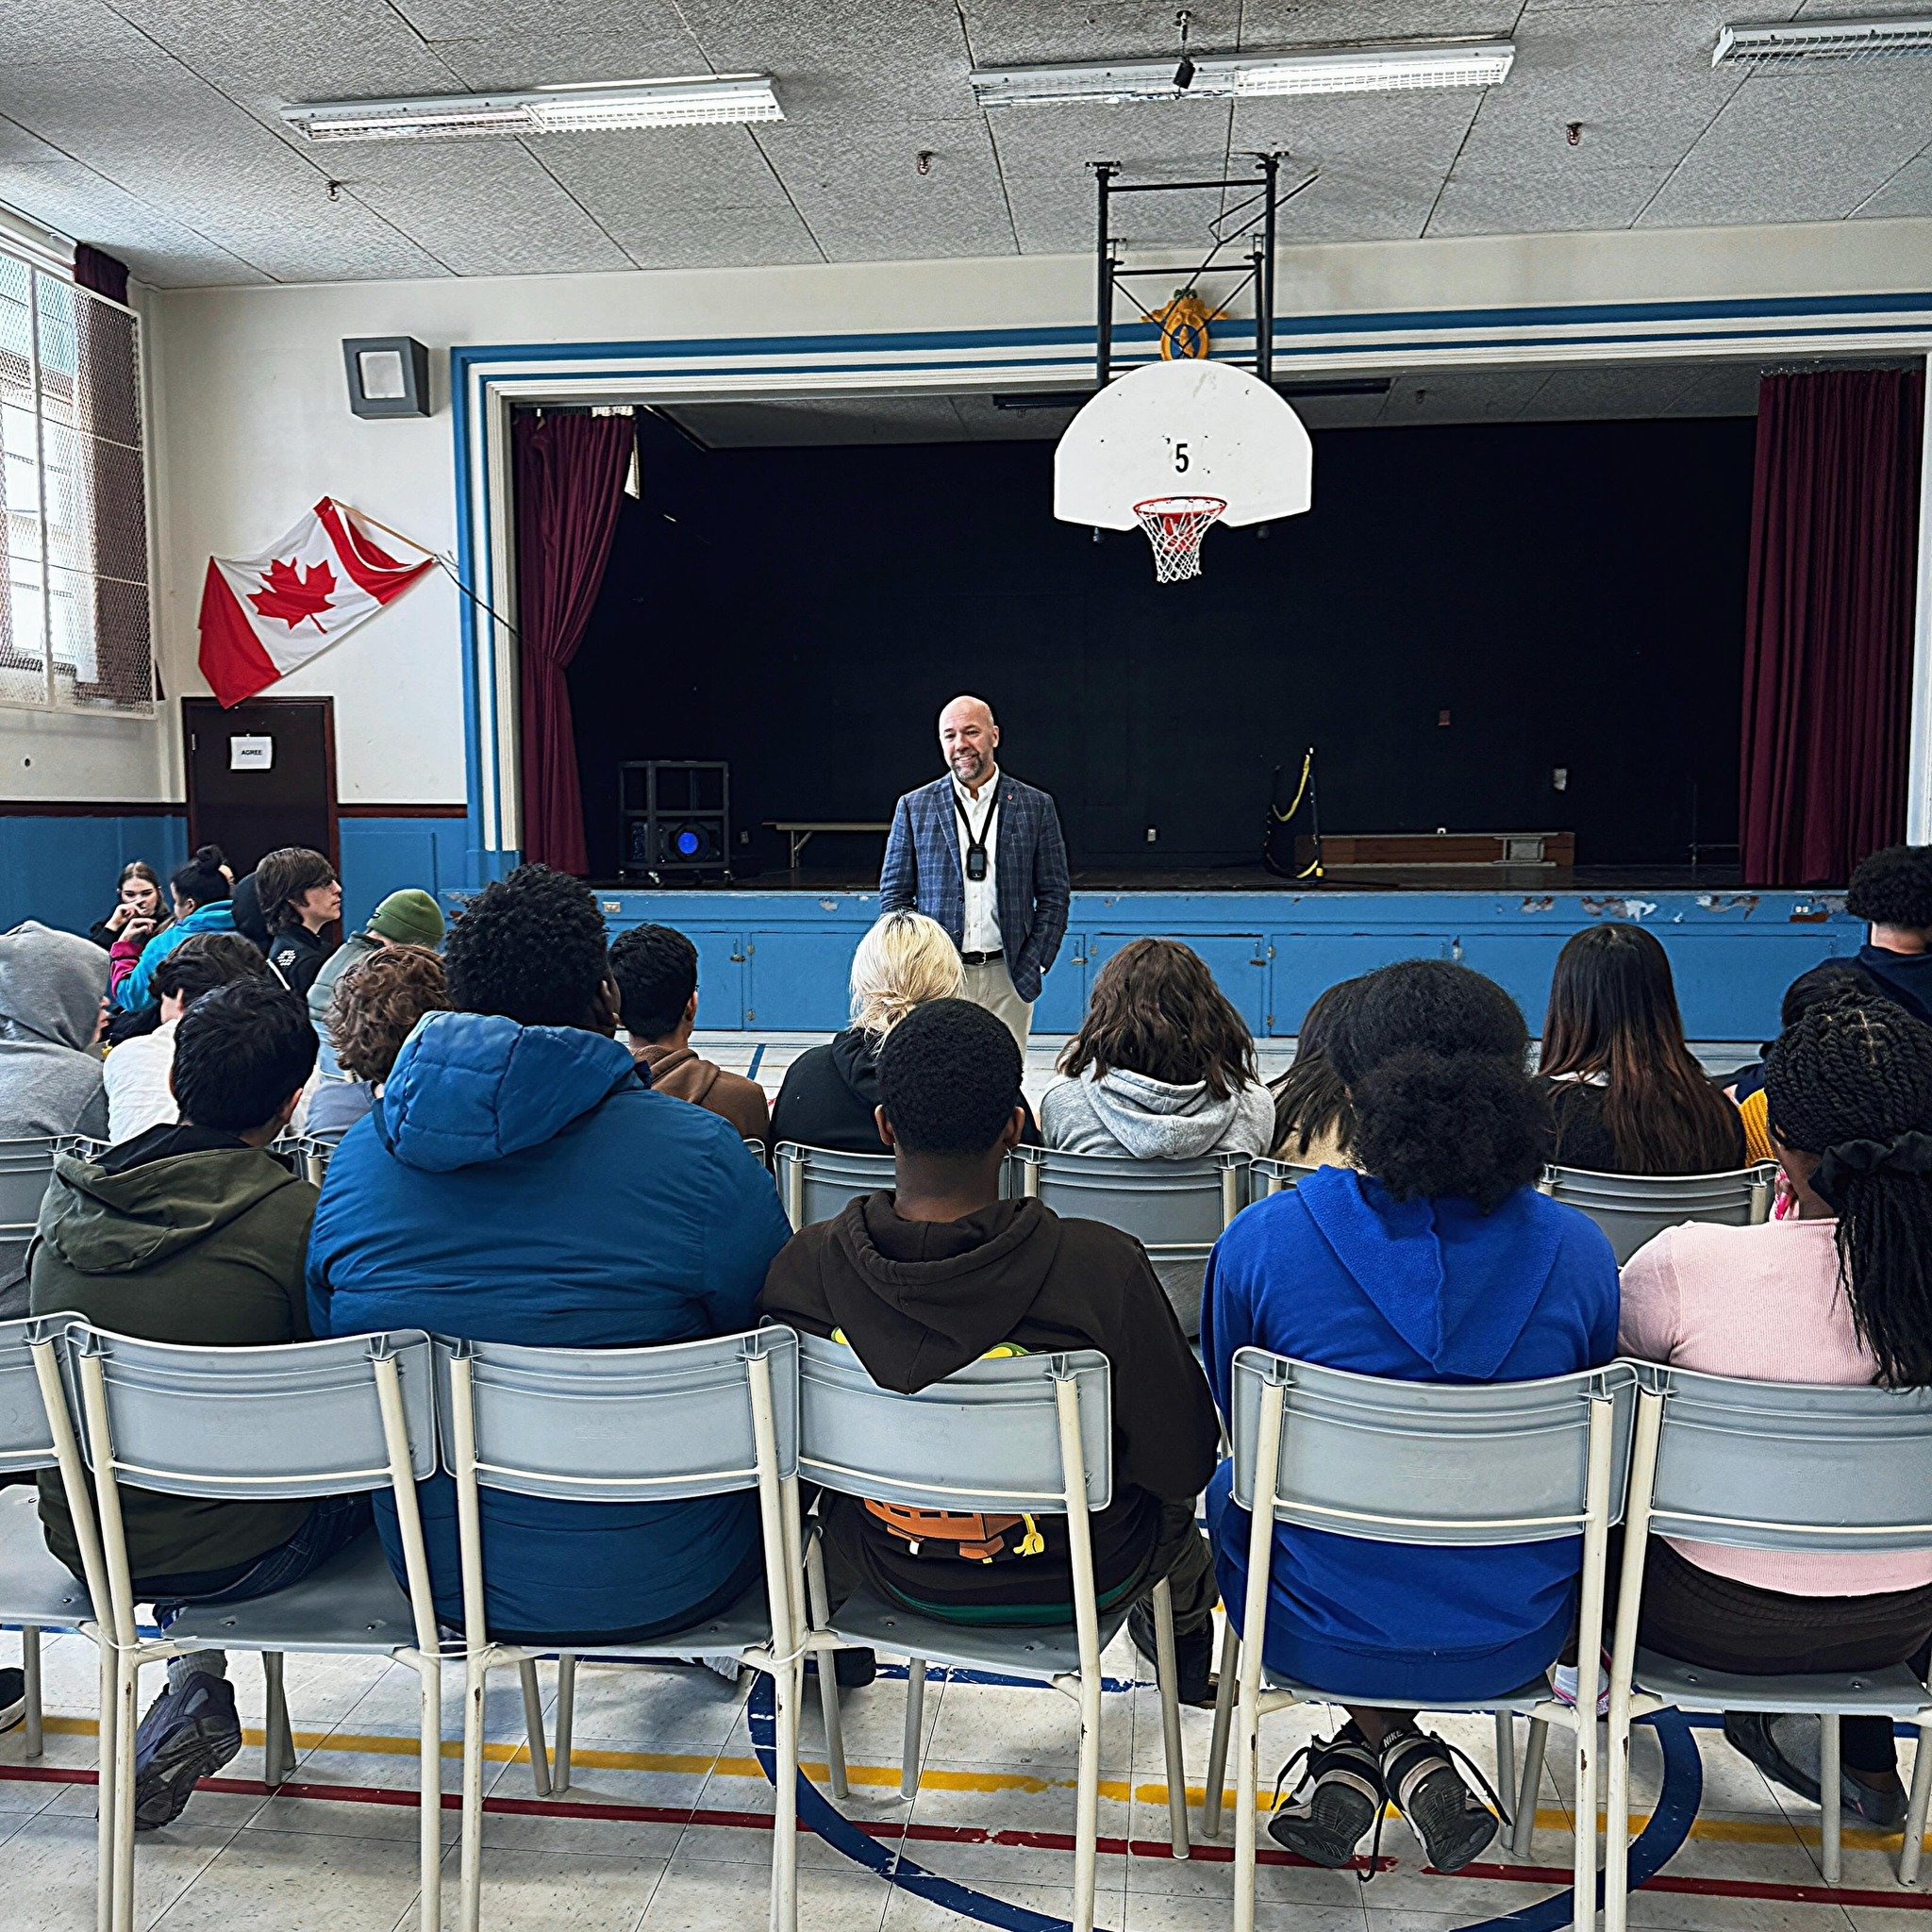 Thank you to the ninth graders at Highland Park Junior High for the discussion about Canadian politics today. Lots of great questions across a range of issues. Stay engaged and keep making your voices heard! @civix_canada @hrce_ns